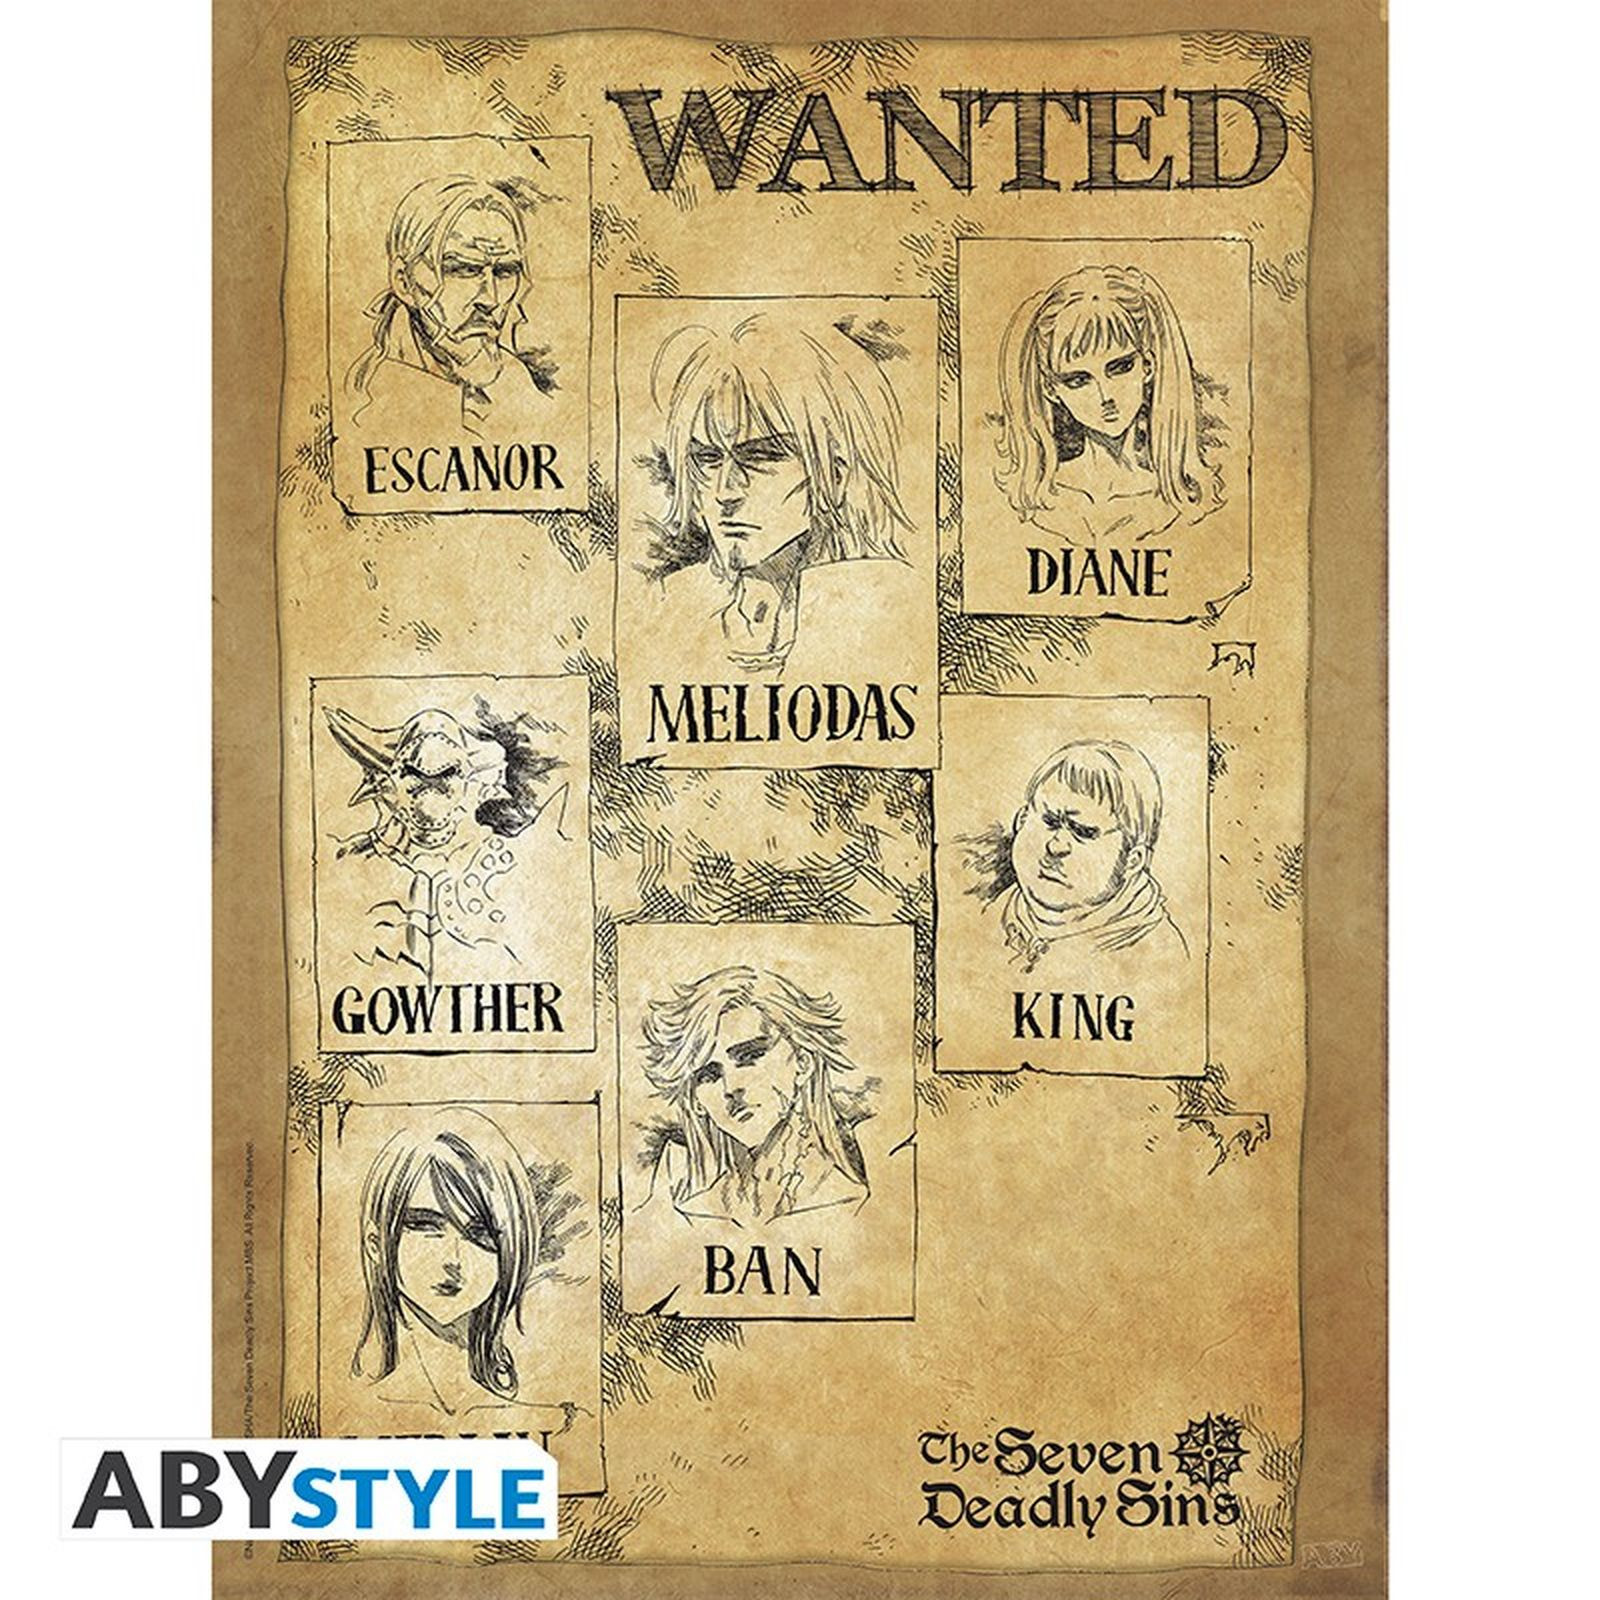 1242-poster-the-seven-deadly-sins-wanted-52-x-38-cm-abystyle.jpg